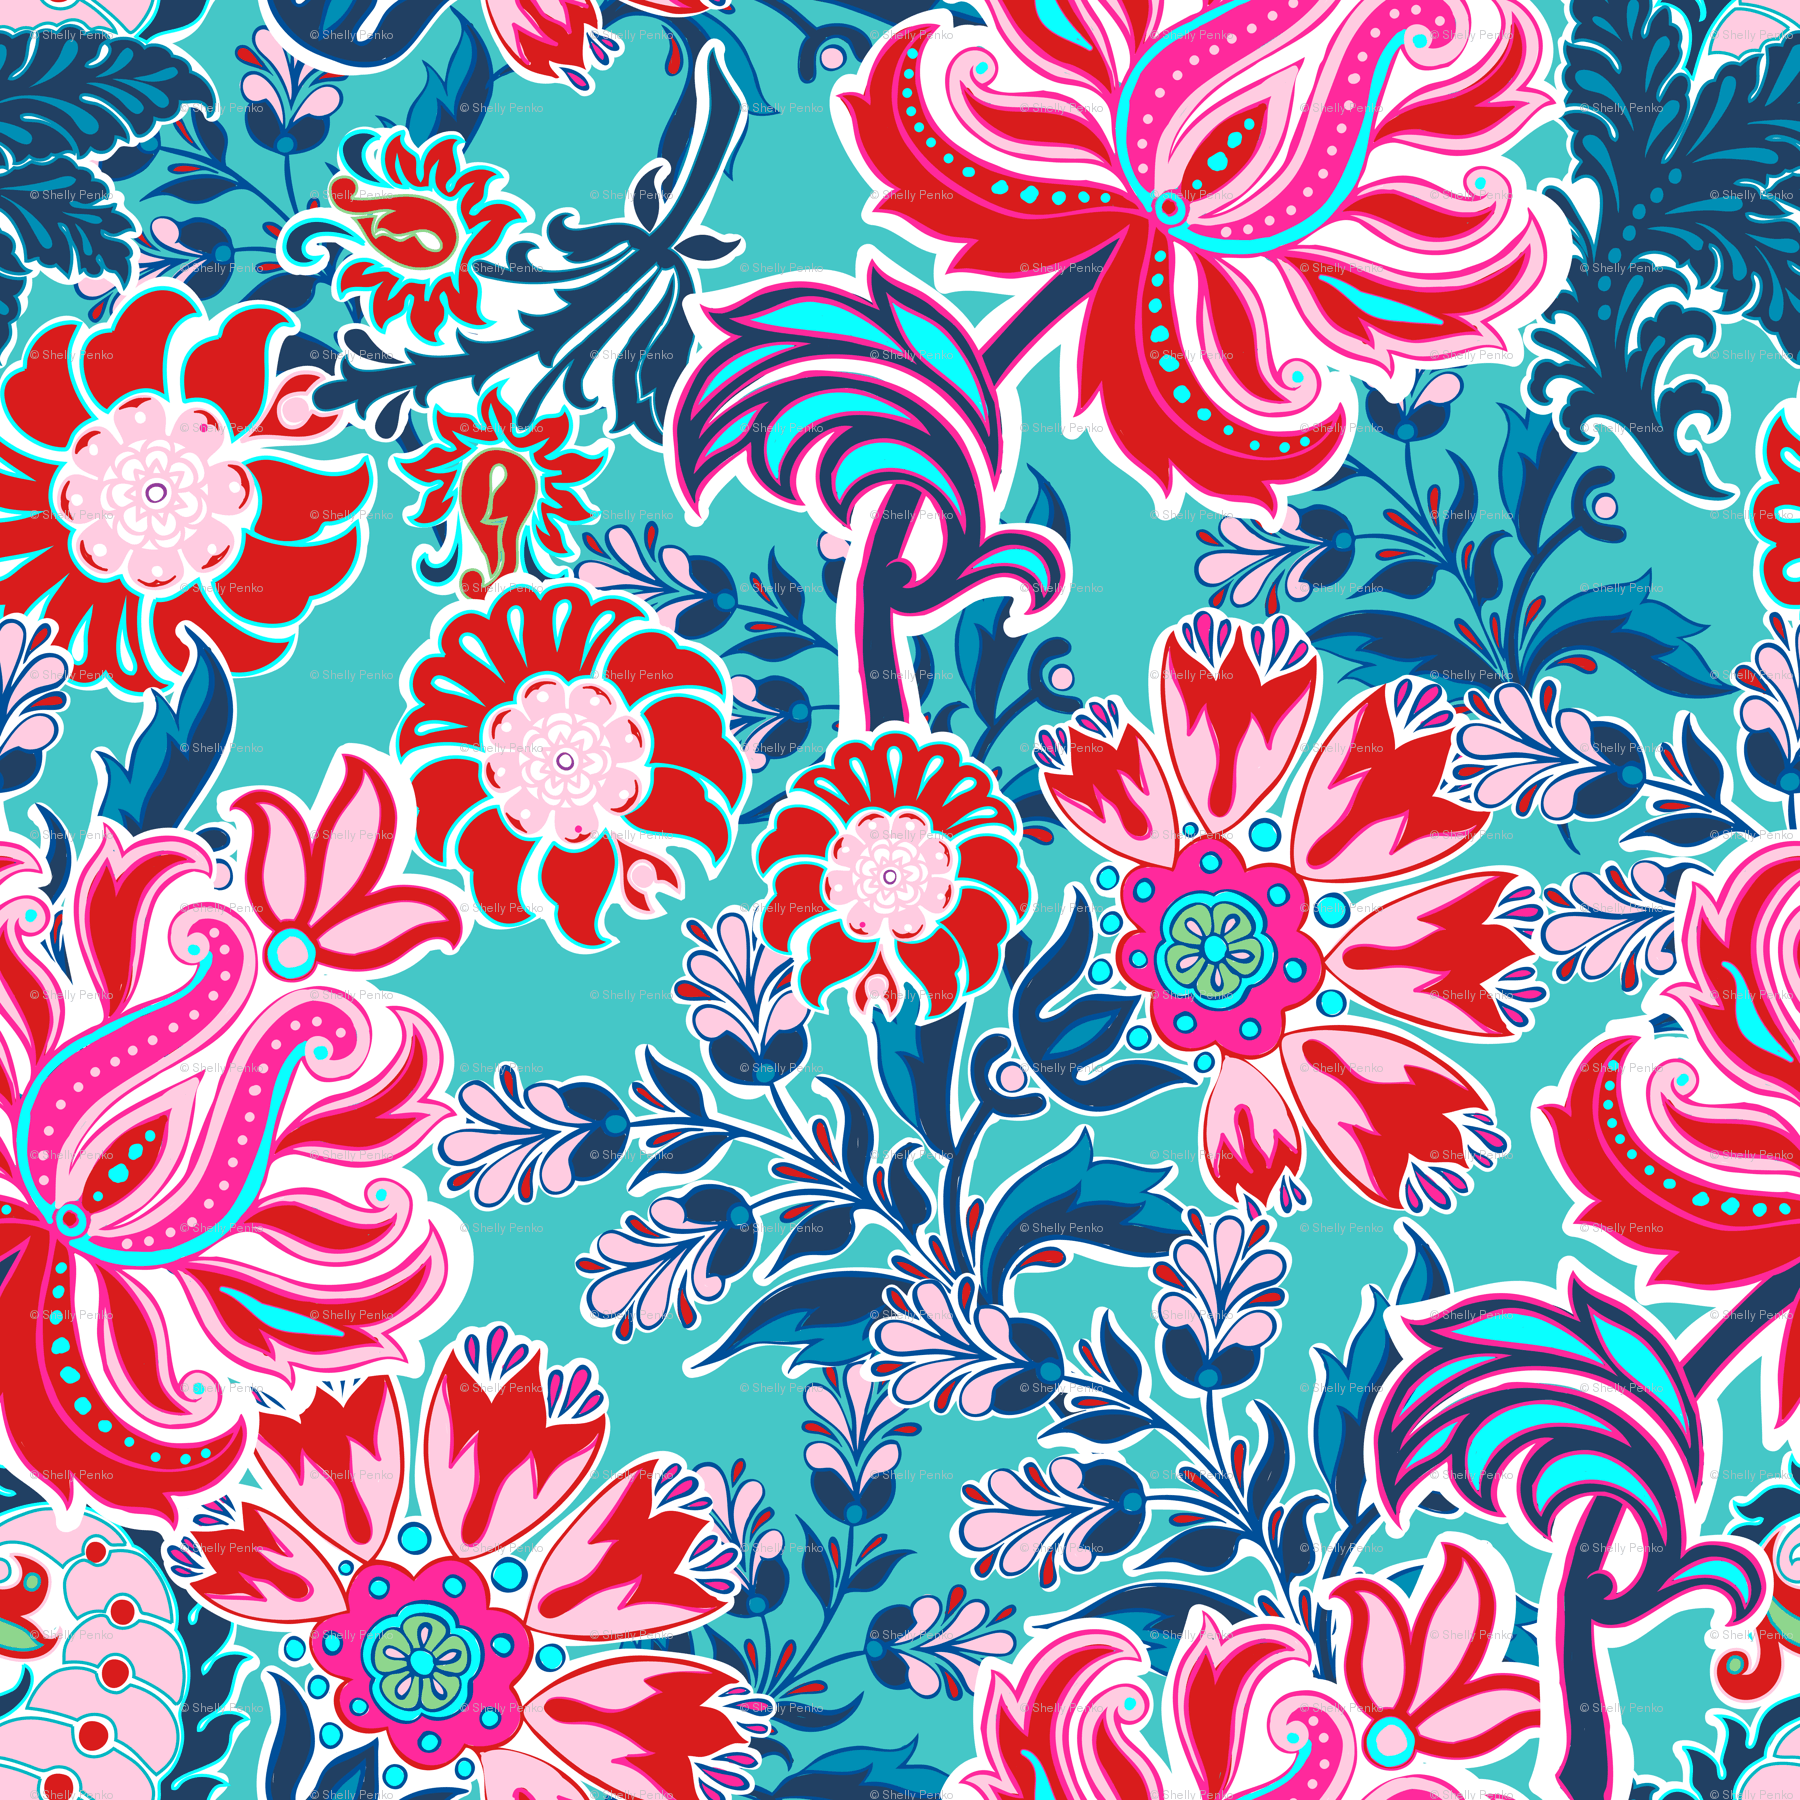 Bohemian Floral Wallpapers - Top Free Bohemian Floral Backgrounds ...